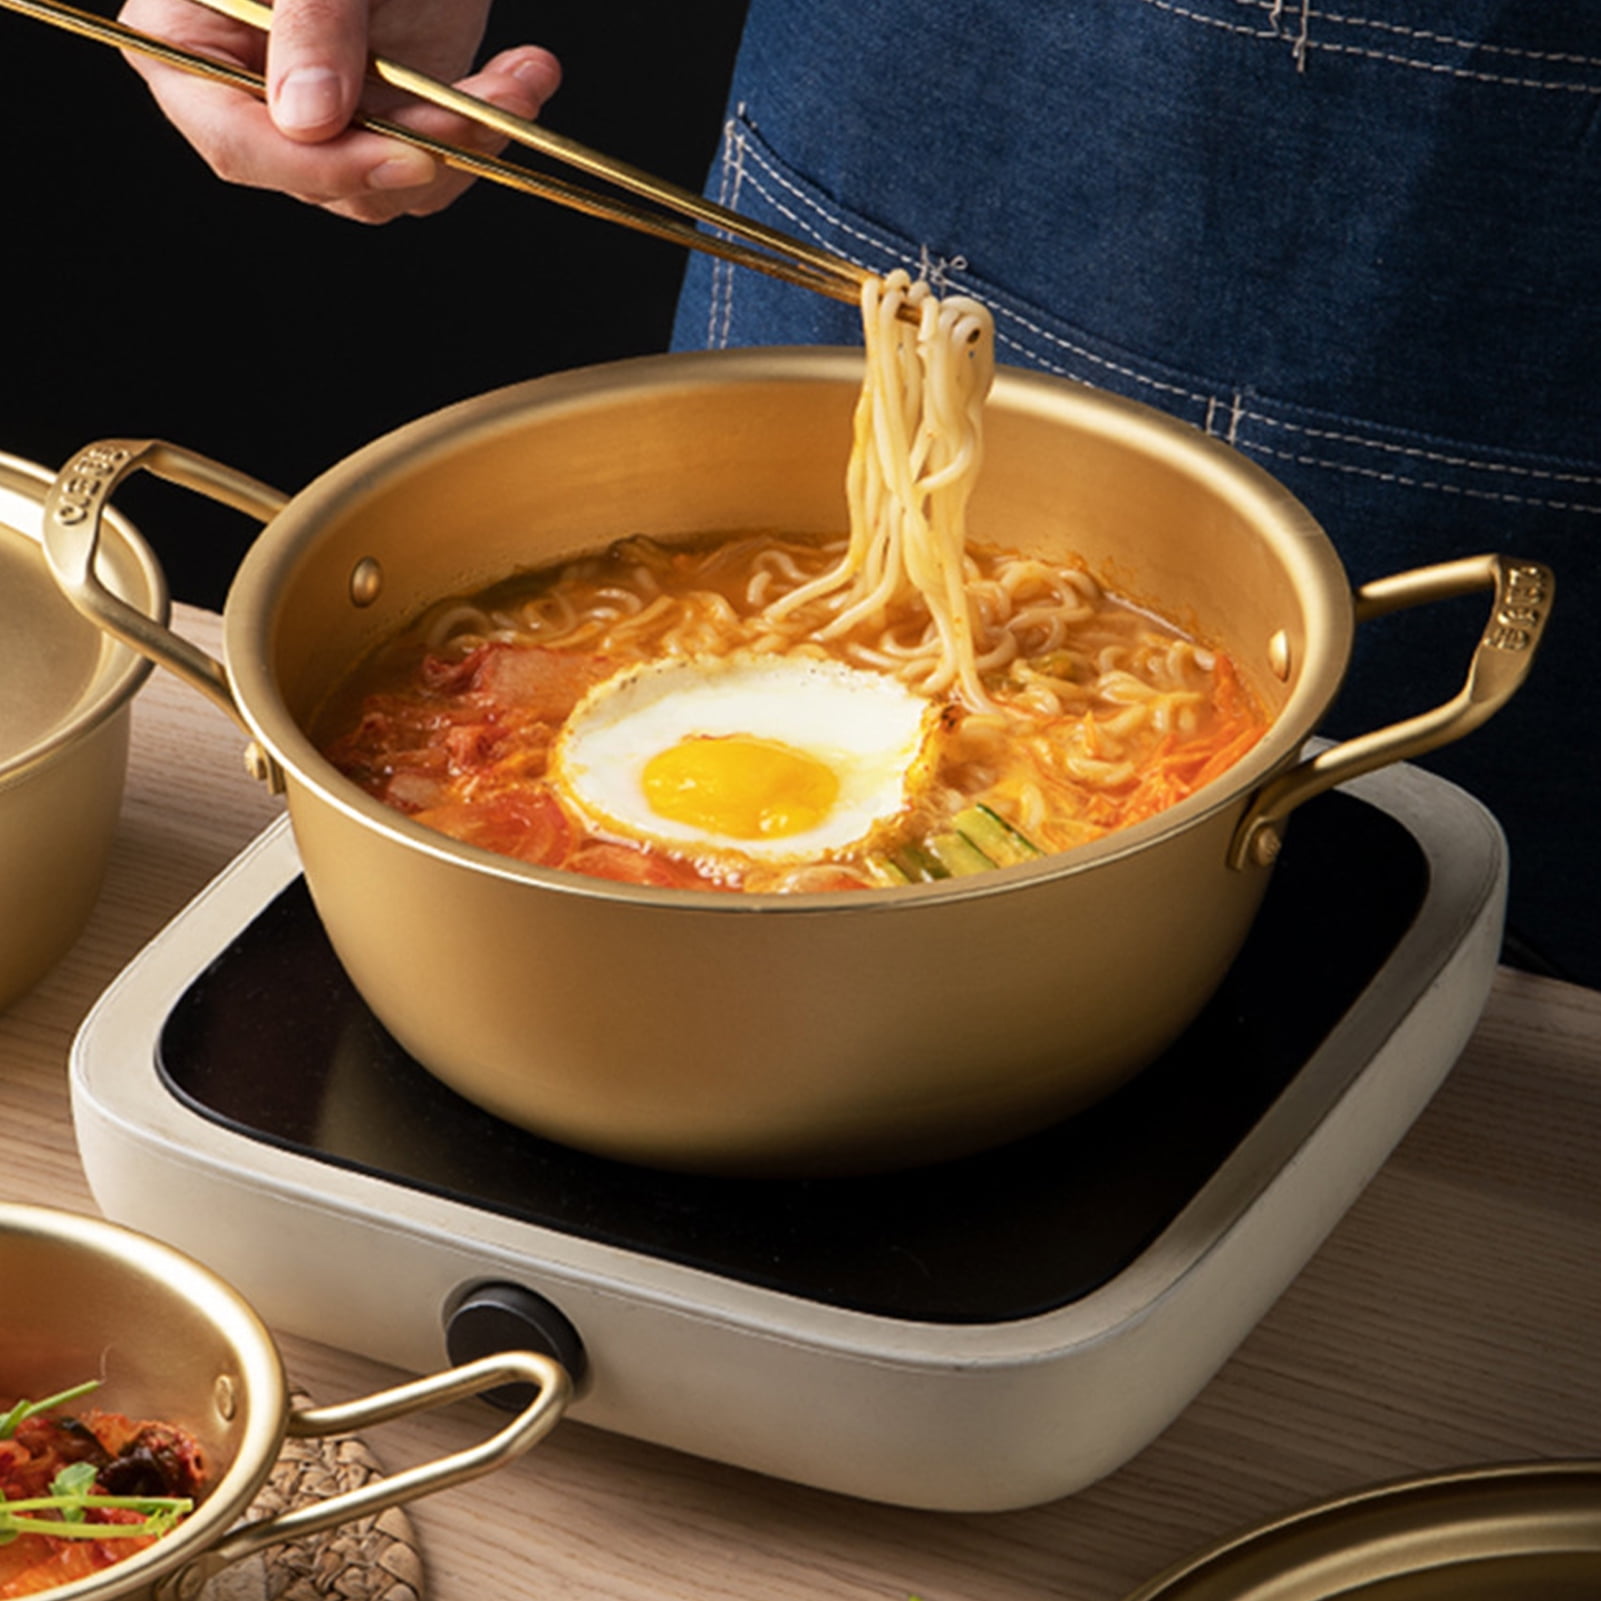 Korean Creative Stainless Steel Ramen Pot with Double Ear Non-Stick Kitchen  Seafood Dry Frying Pan